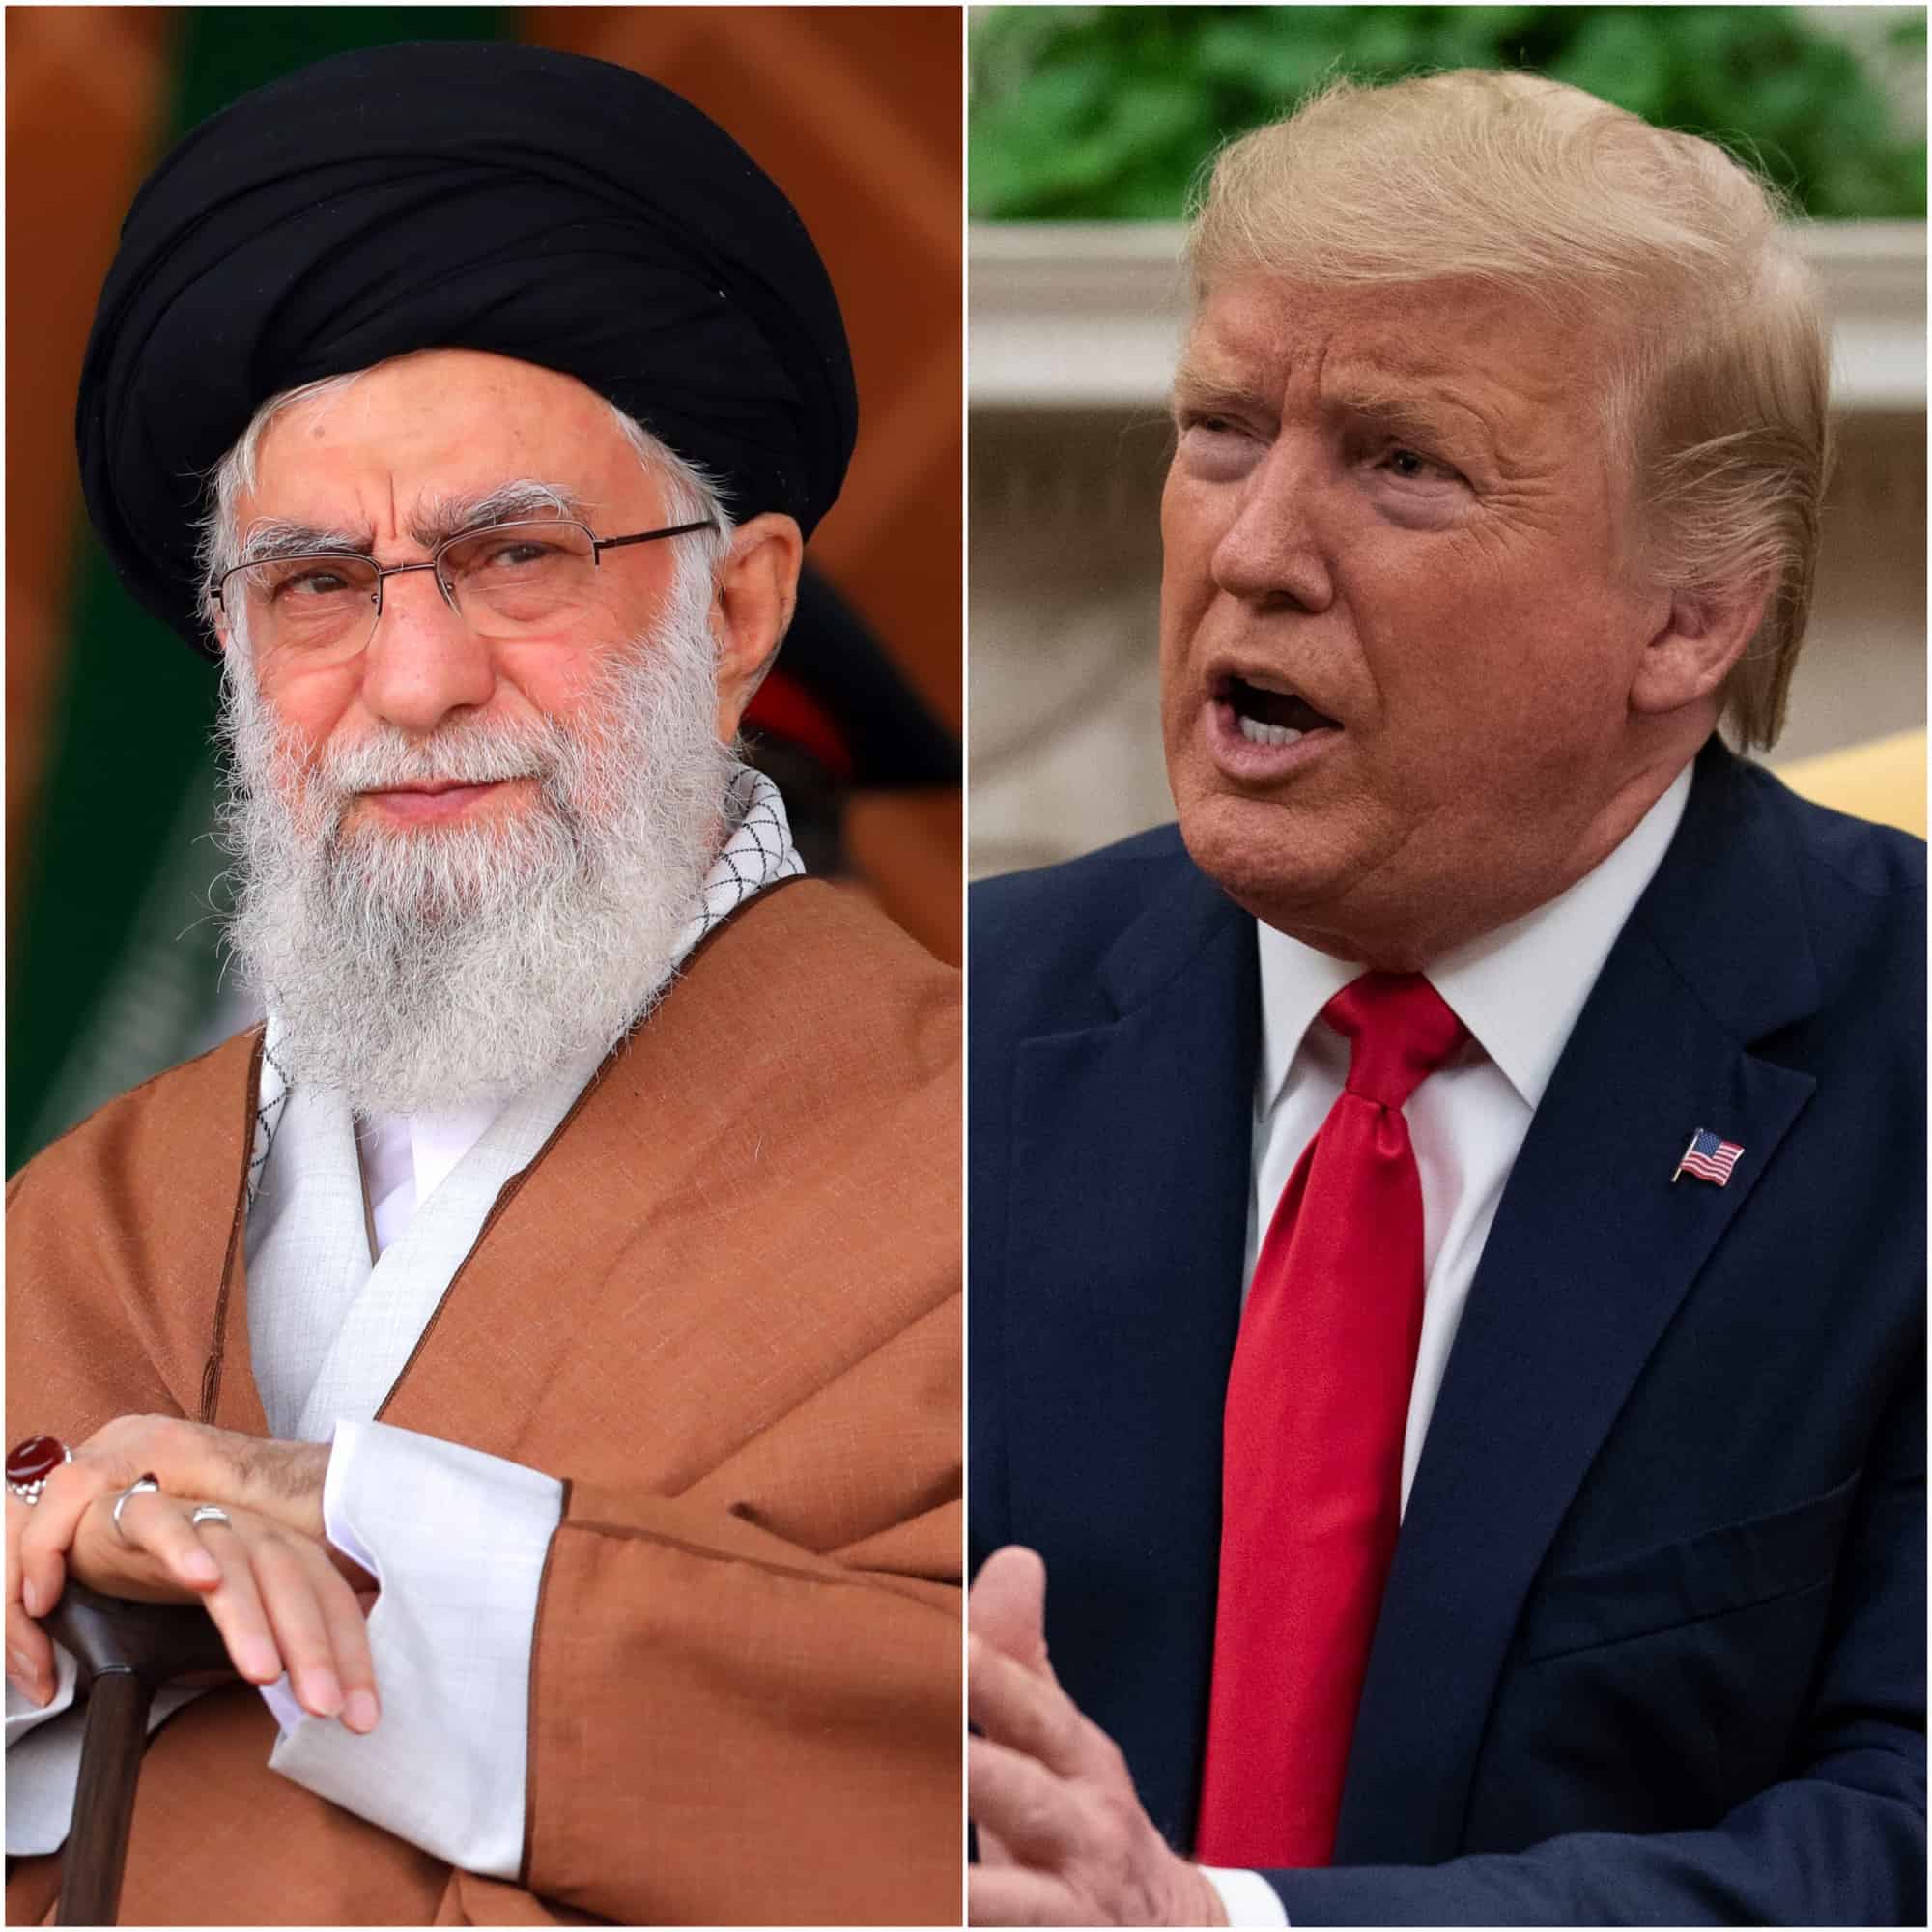 Key events leading up to US-Iran confrontation